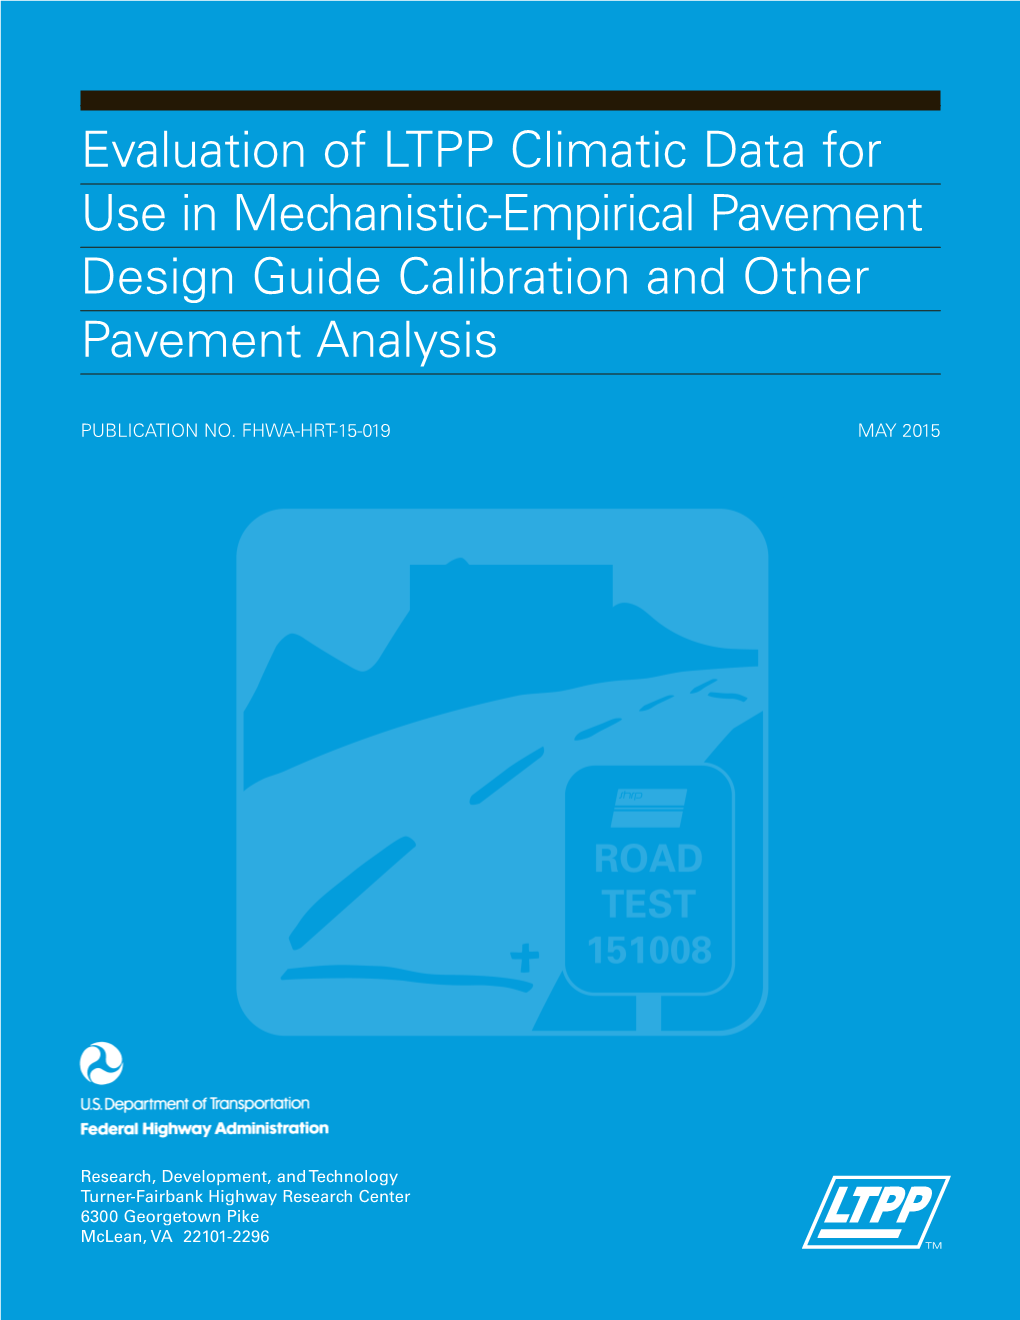 Evaluation of Long-Term Pavement Performance (LTTP) Climatic Data for May 2015 Use in Mechanistic-Empirical Pavement Design Guide(MEPDG) Calibration 6